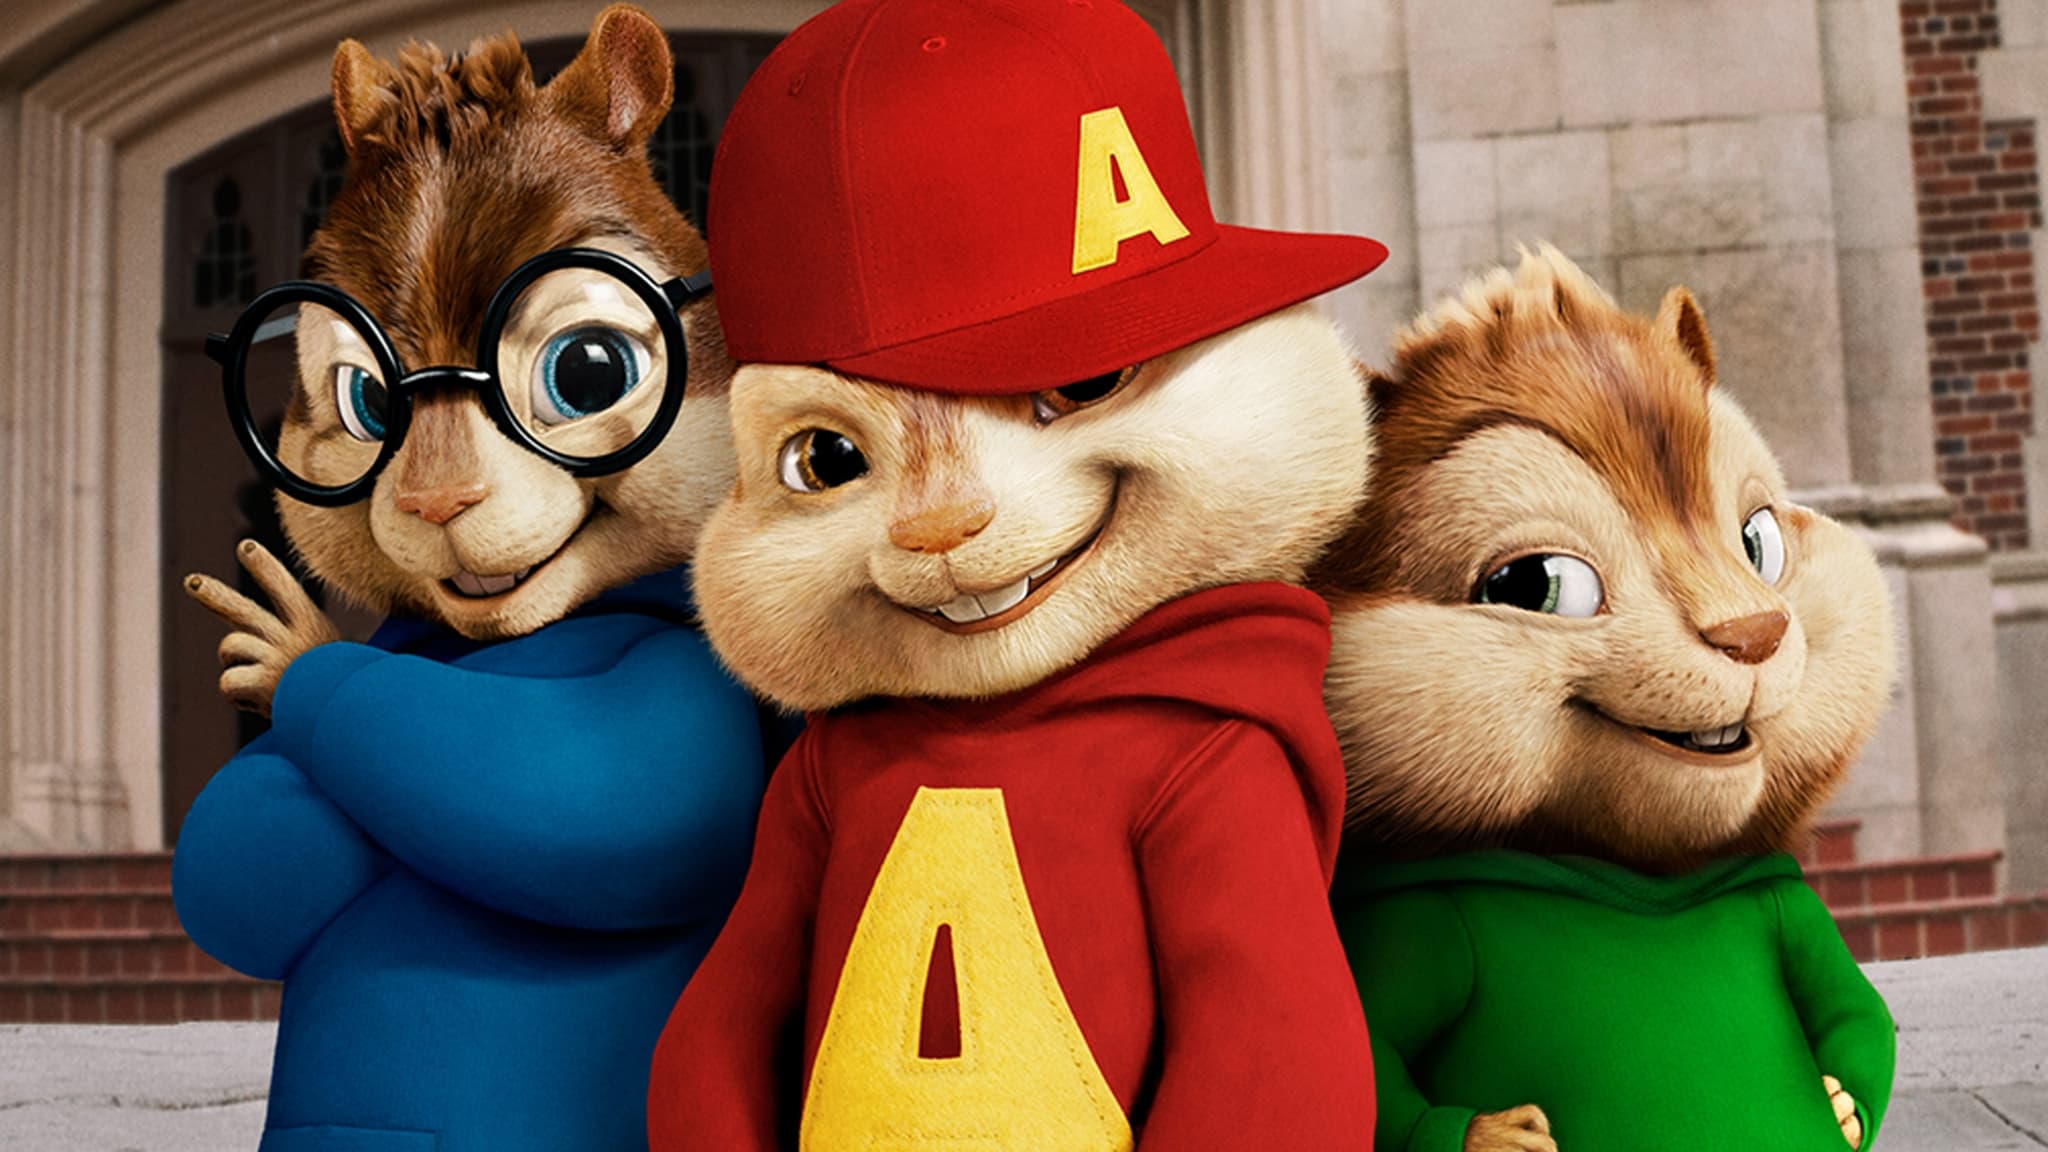 Alvin And The Chipmunks 2 - Trailer HD.